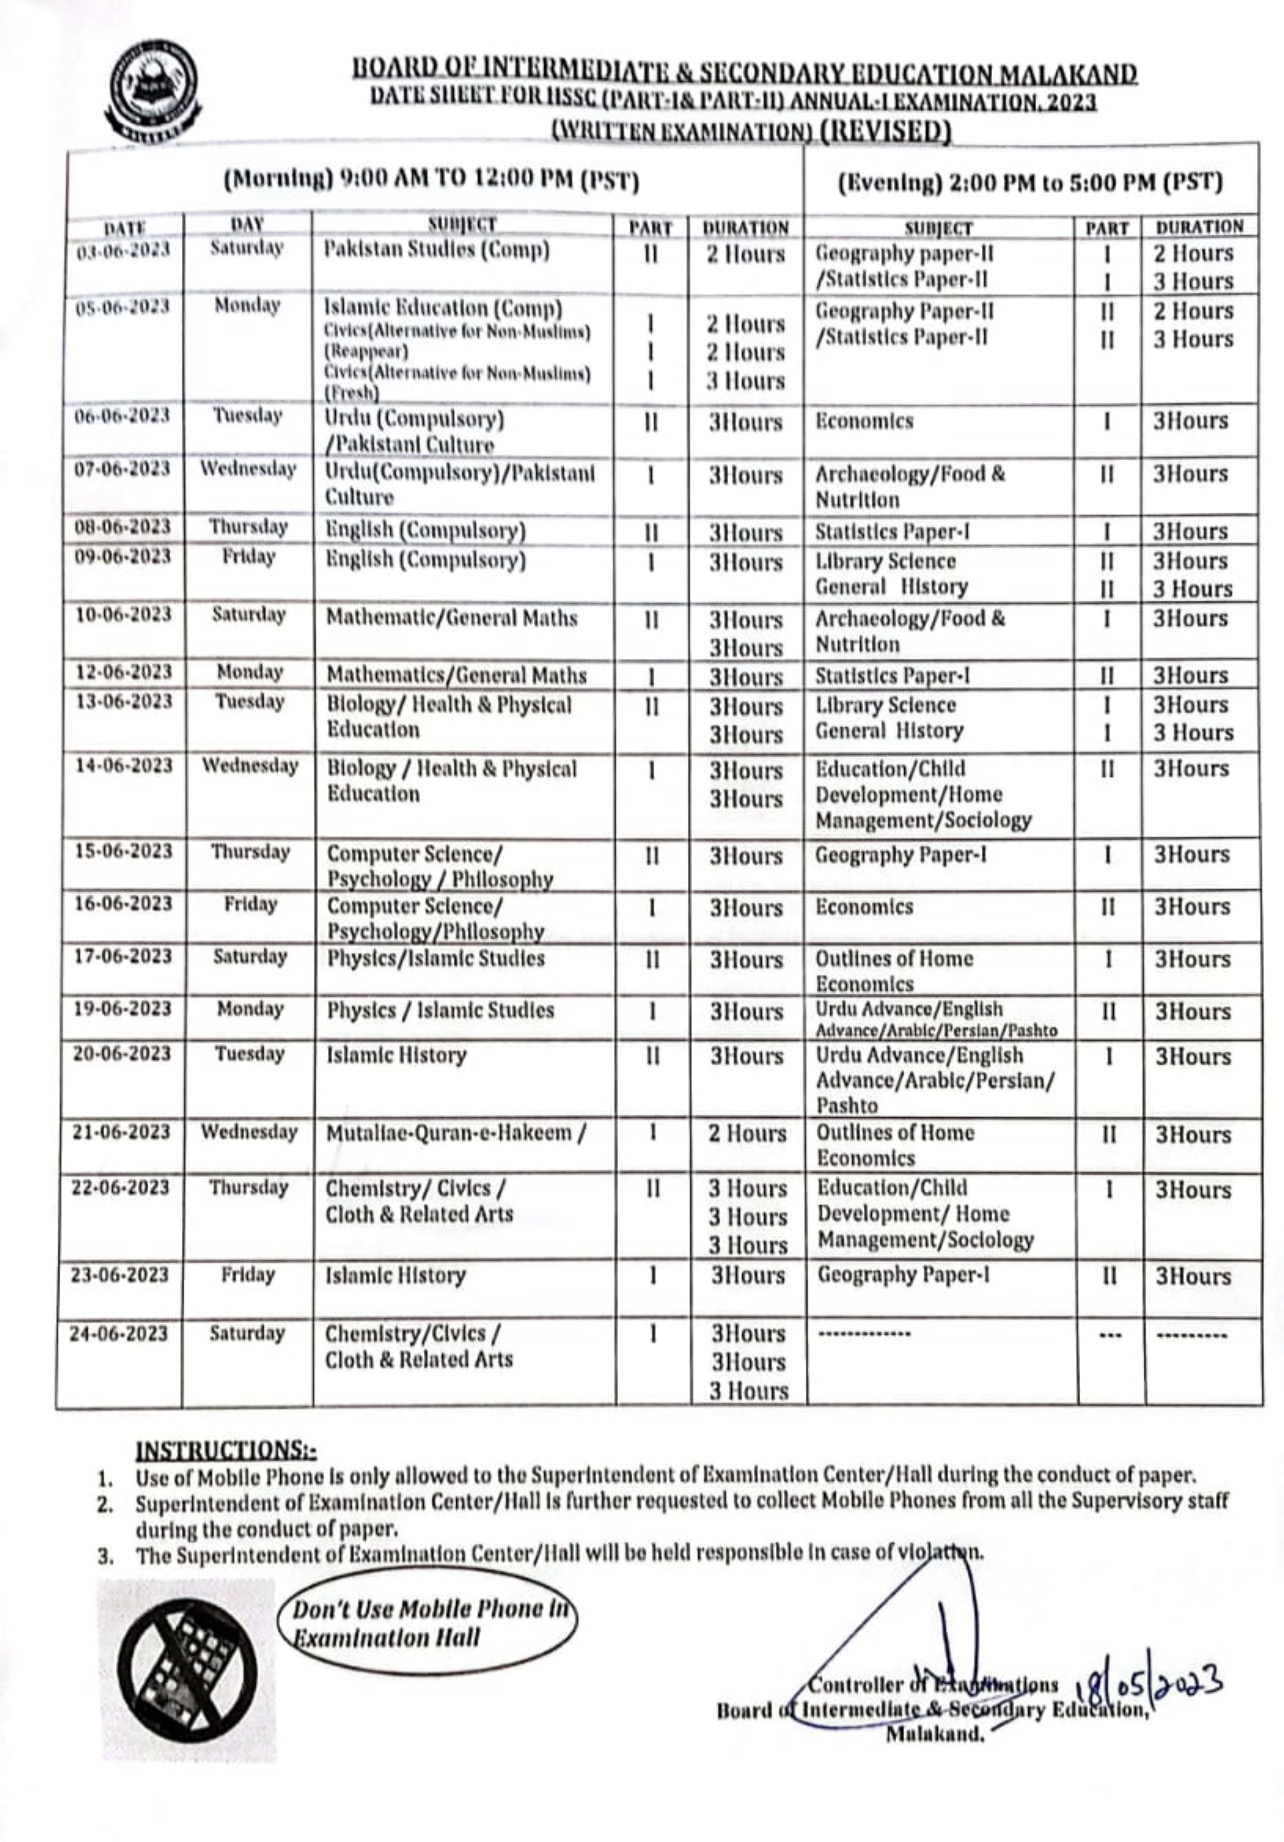 BISE Malakand 11th & 12th Class Date Sheet 2023 1st Annual